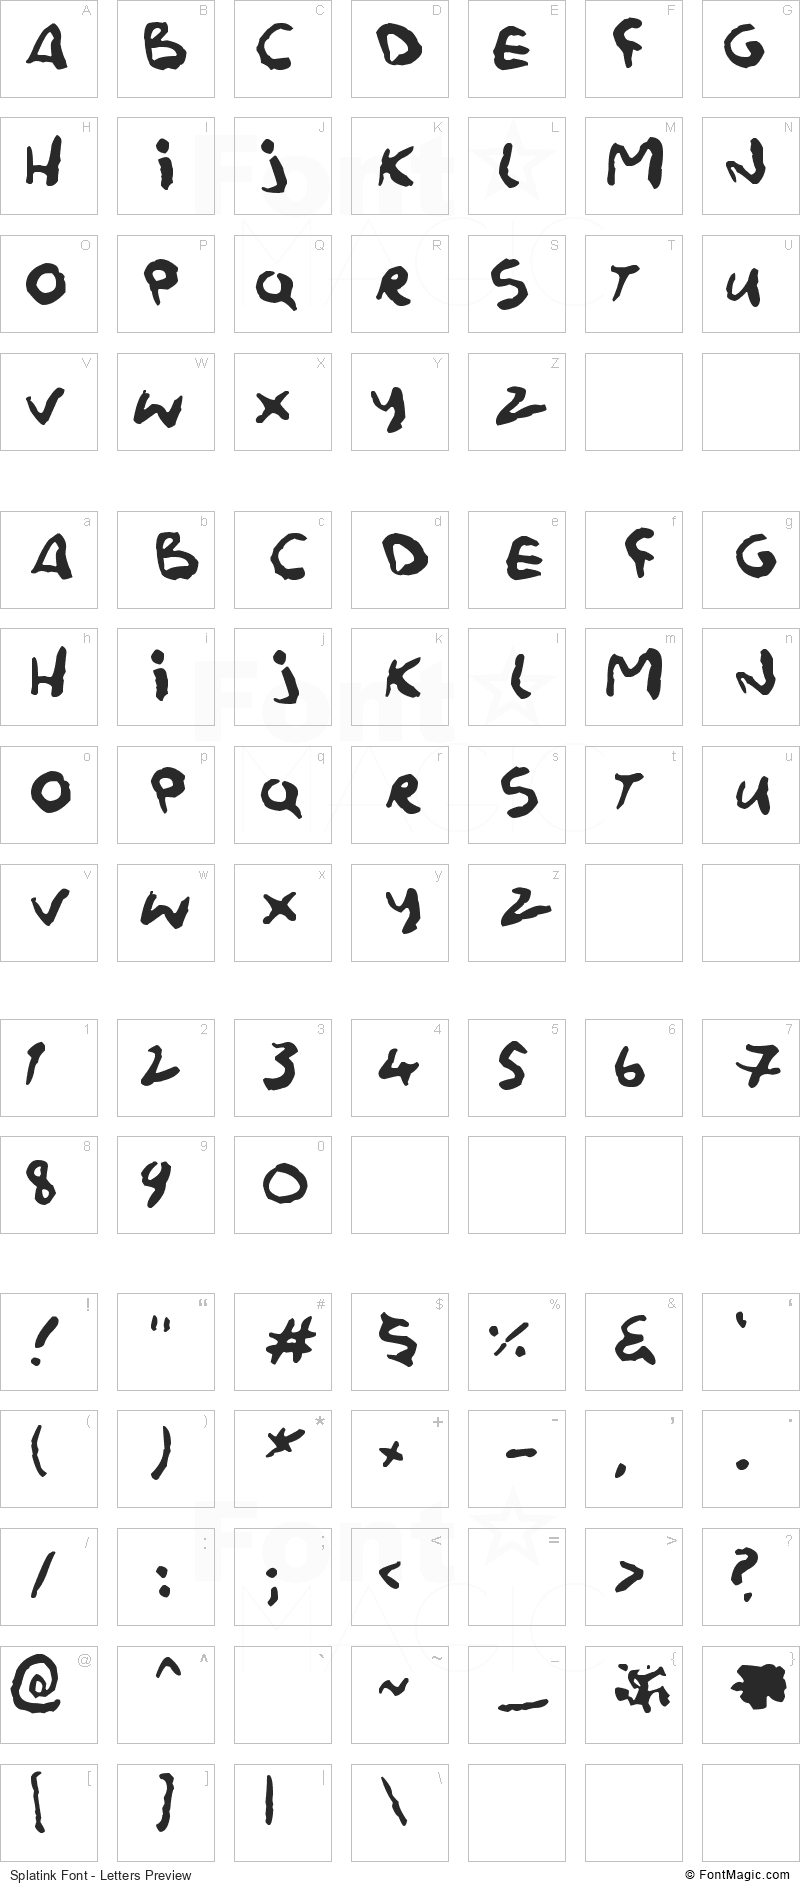 Splatink Font - All Latters Preview Chart